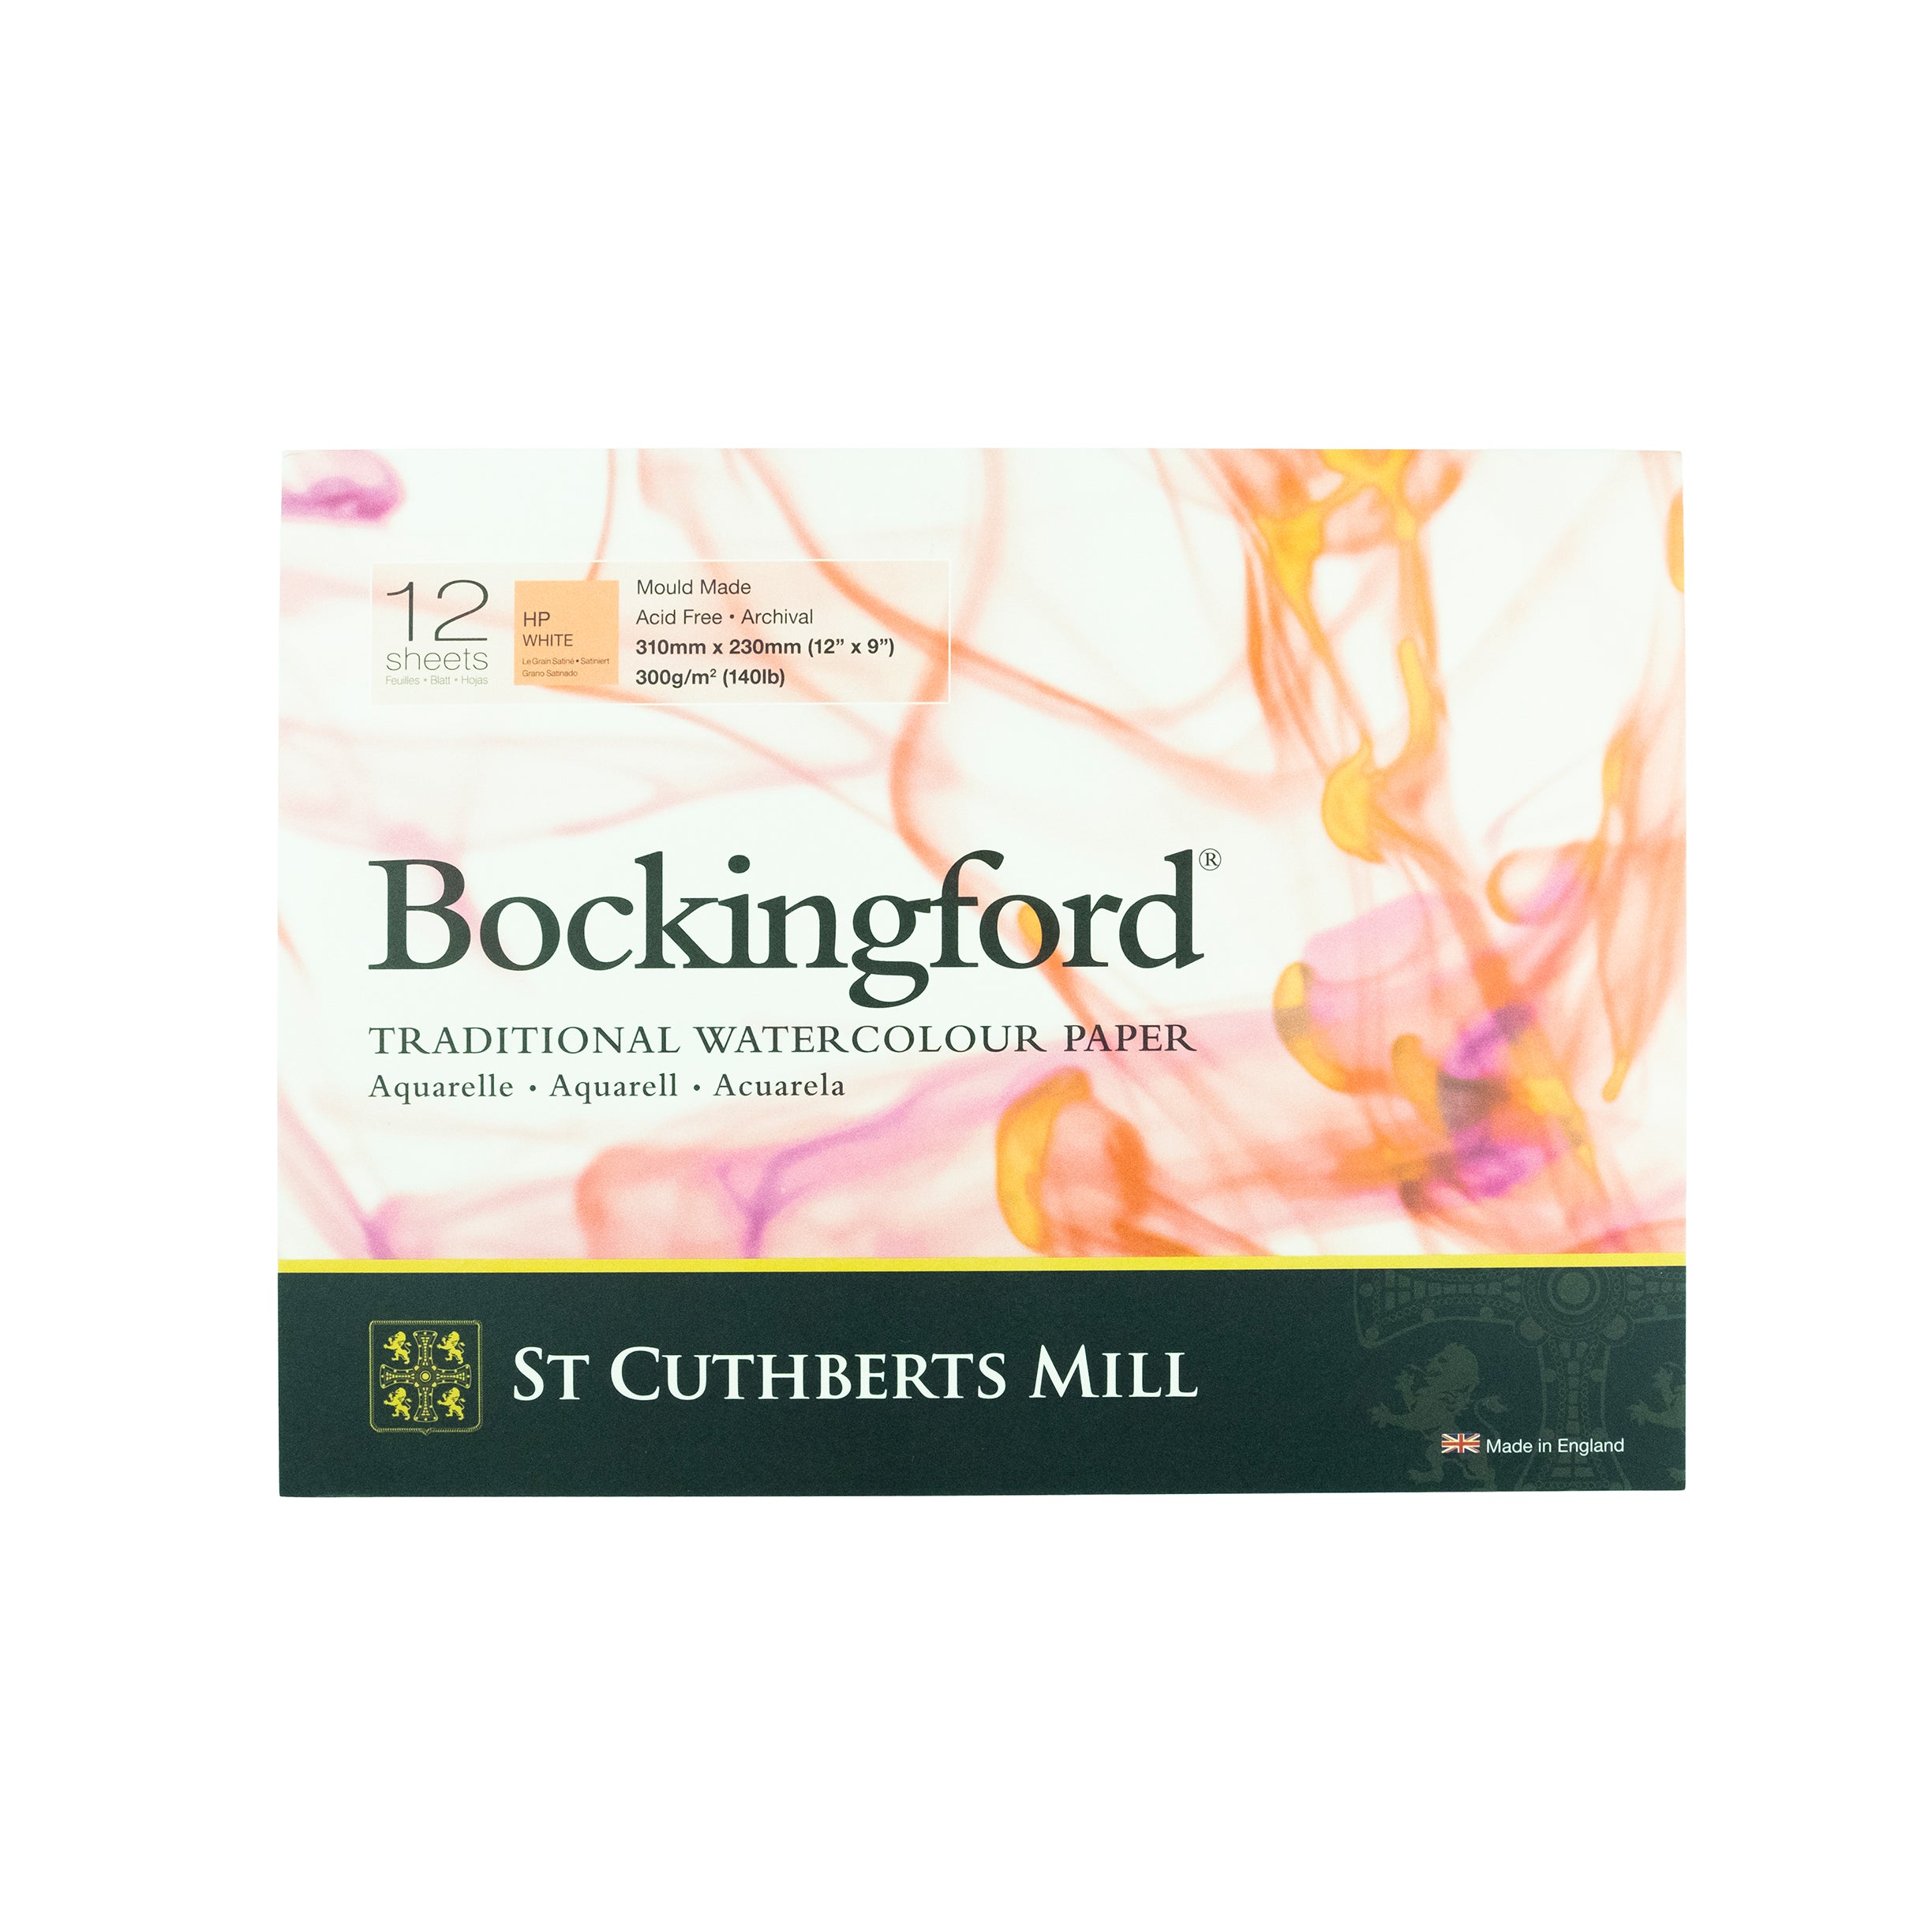 St Cuthberts Mill Bockingford Traditional Hot Press Watercolour Paper Pad